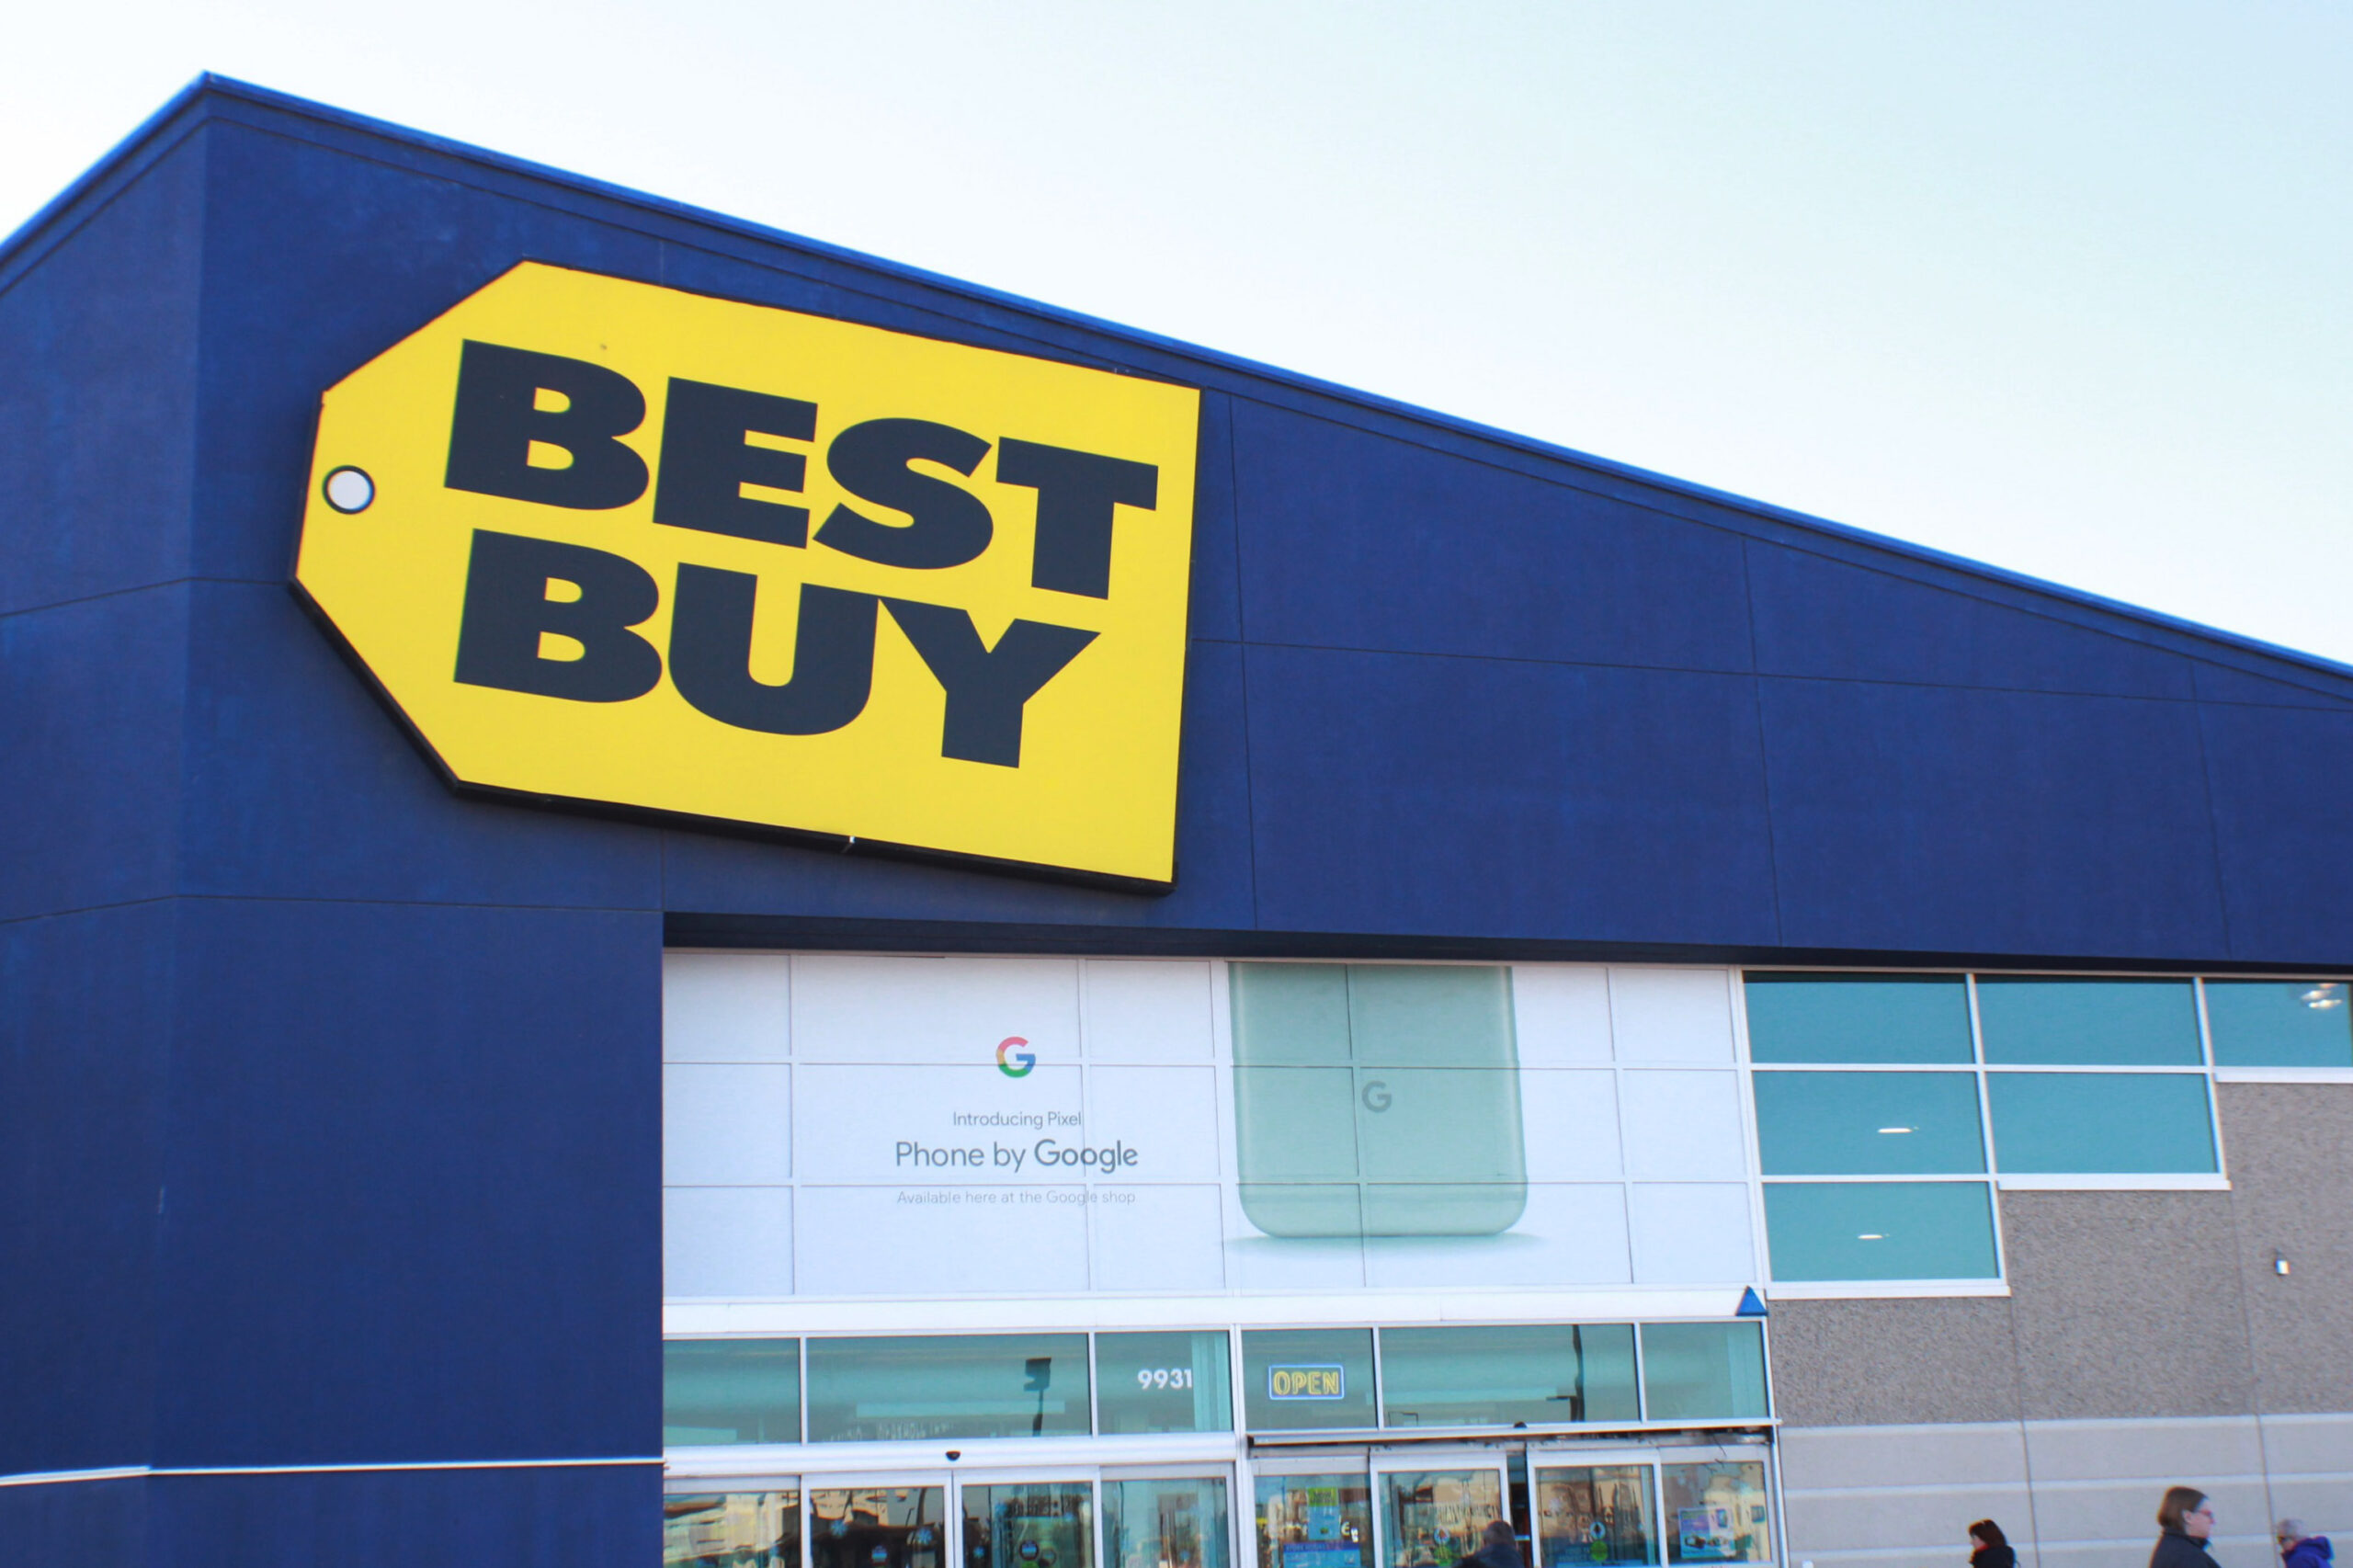 Customers and workers surprised as Best Buy shutters 15 stores